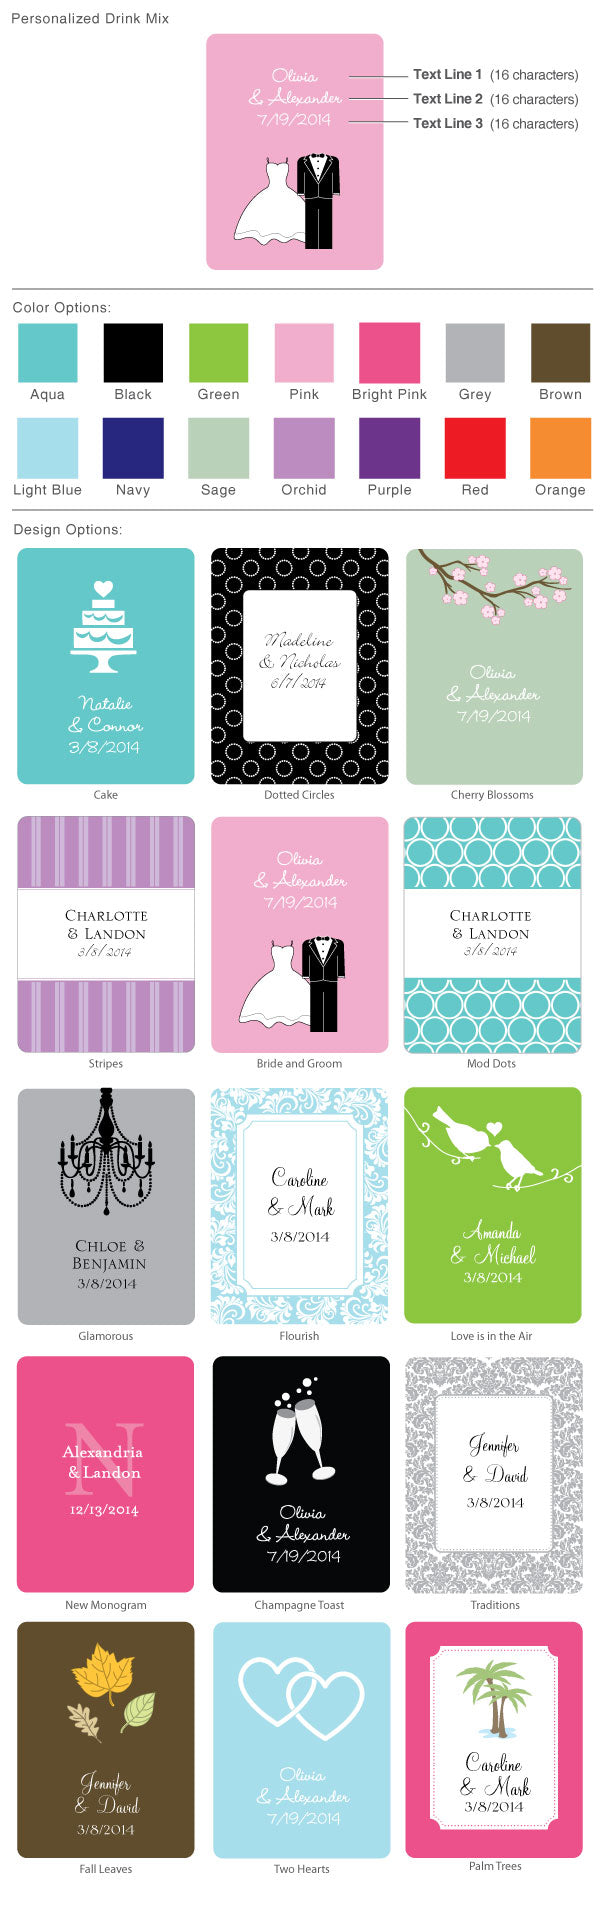 Personalized Lemonade Drink Mix Favor (Many Designs Available) - Alternate Image 2 | My Wedding Favors